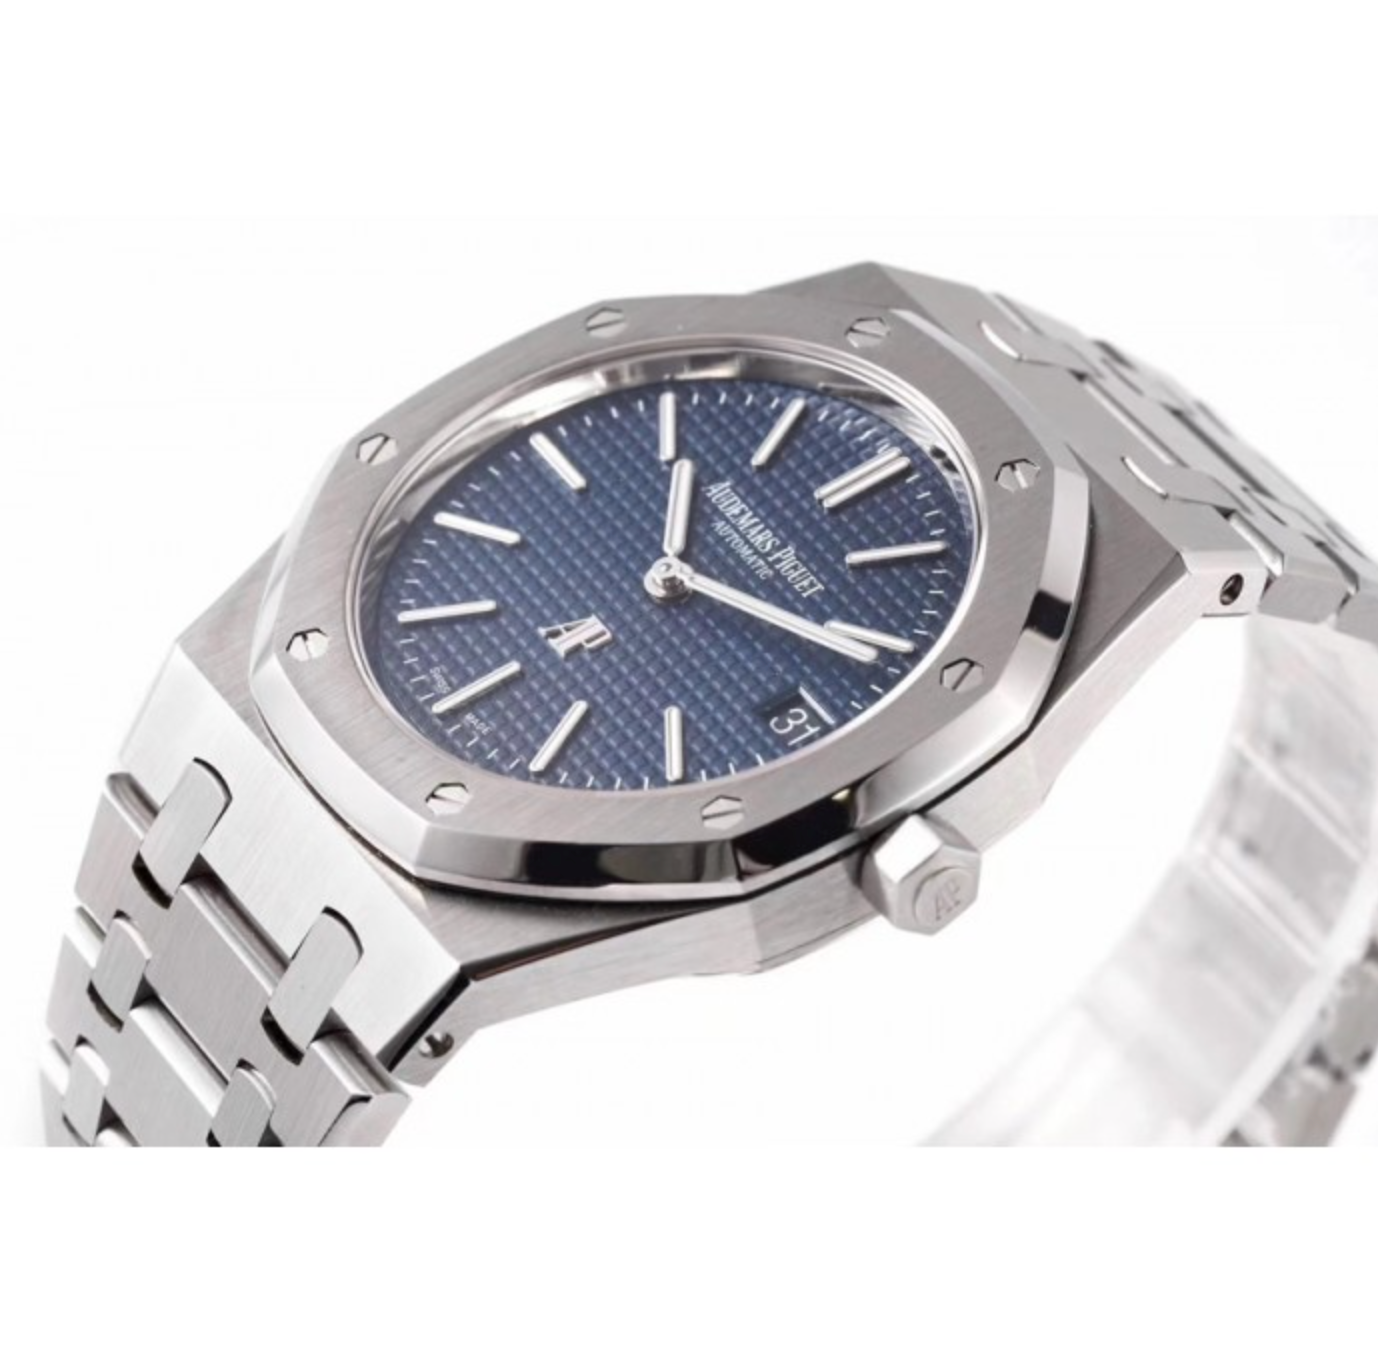 AP ROYAL OAK EXTRA THIN 39MM 15202ST.OO.1240ST.01 SS BLUE DIAL SWISS 2121 - IP Empire Replica Watches